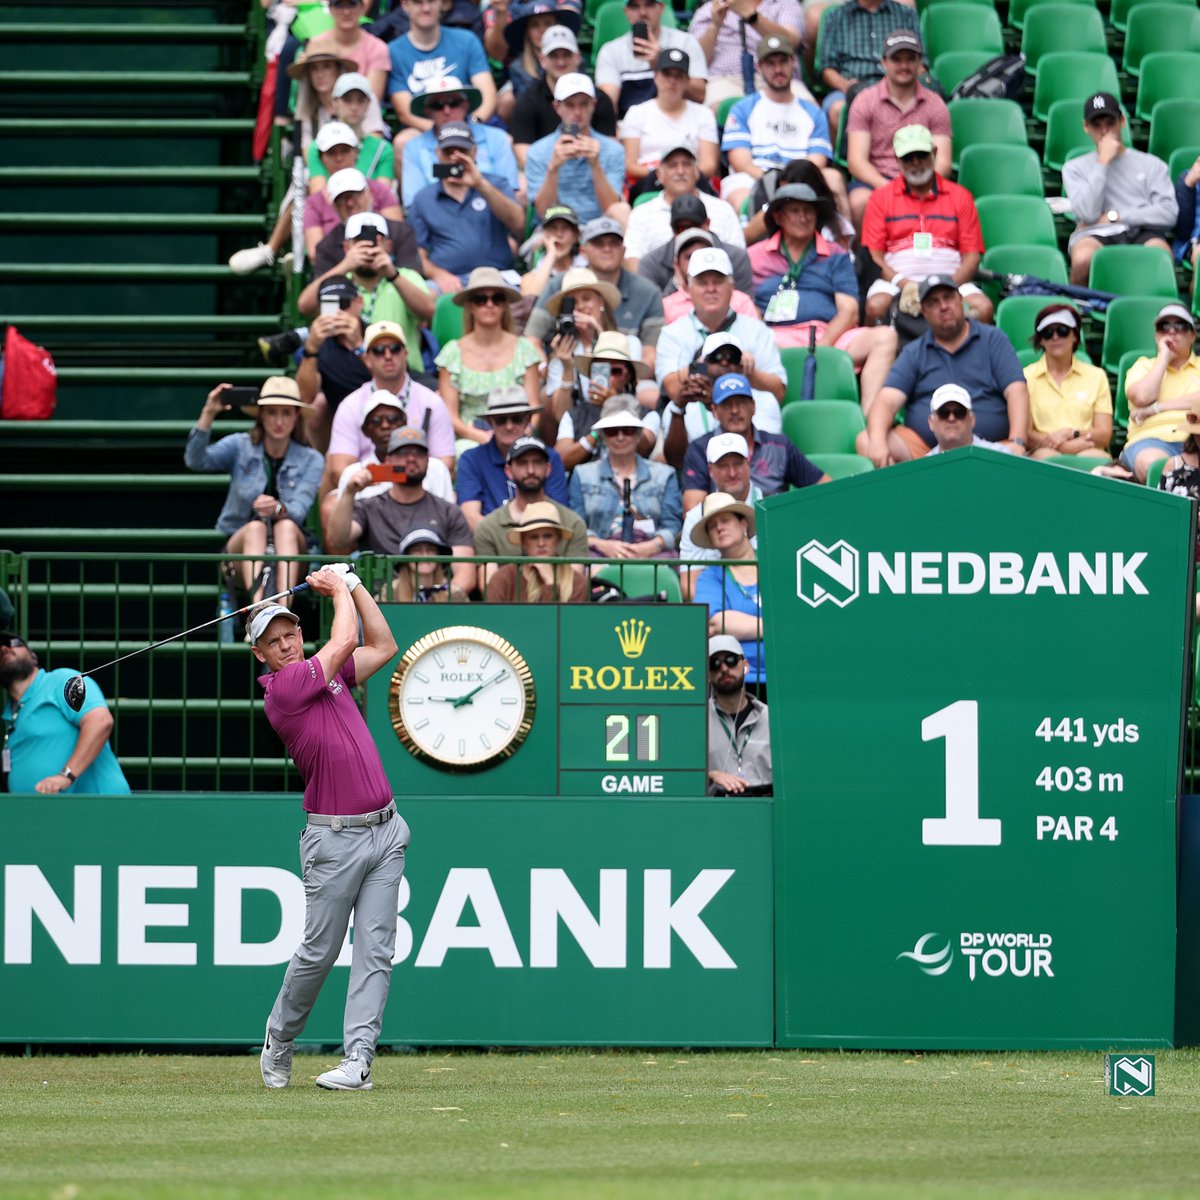 𝐔𝐏𝐃𝐀𝐓𝐄: The final round of the Nedbank Golf Challenge has been suspended due to bad weather.

More updates to follow.